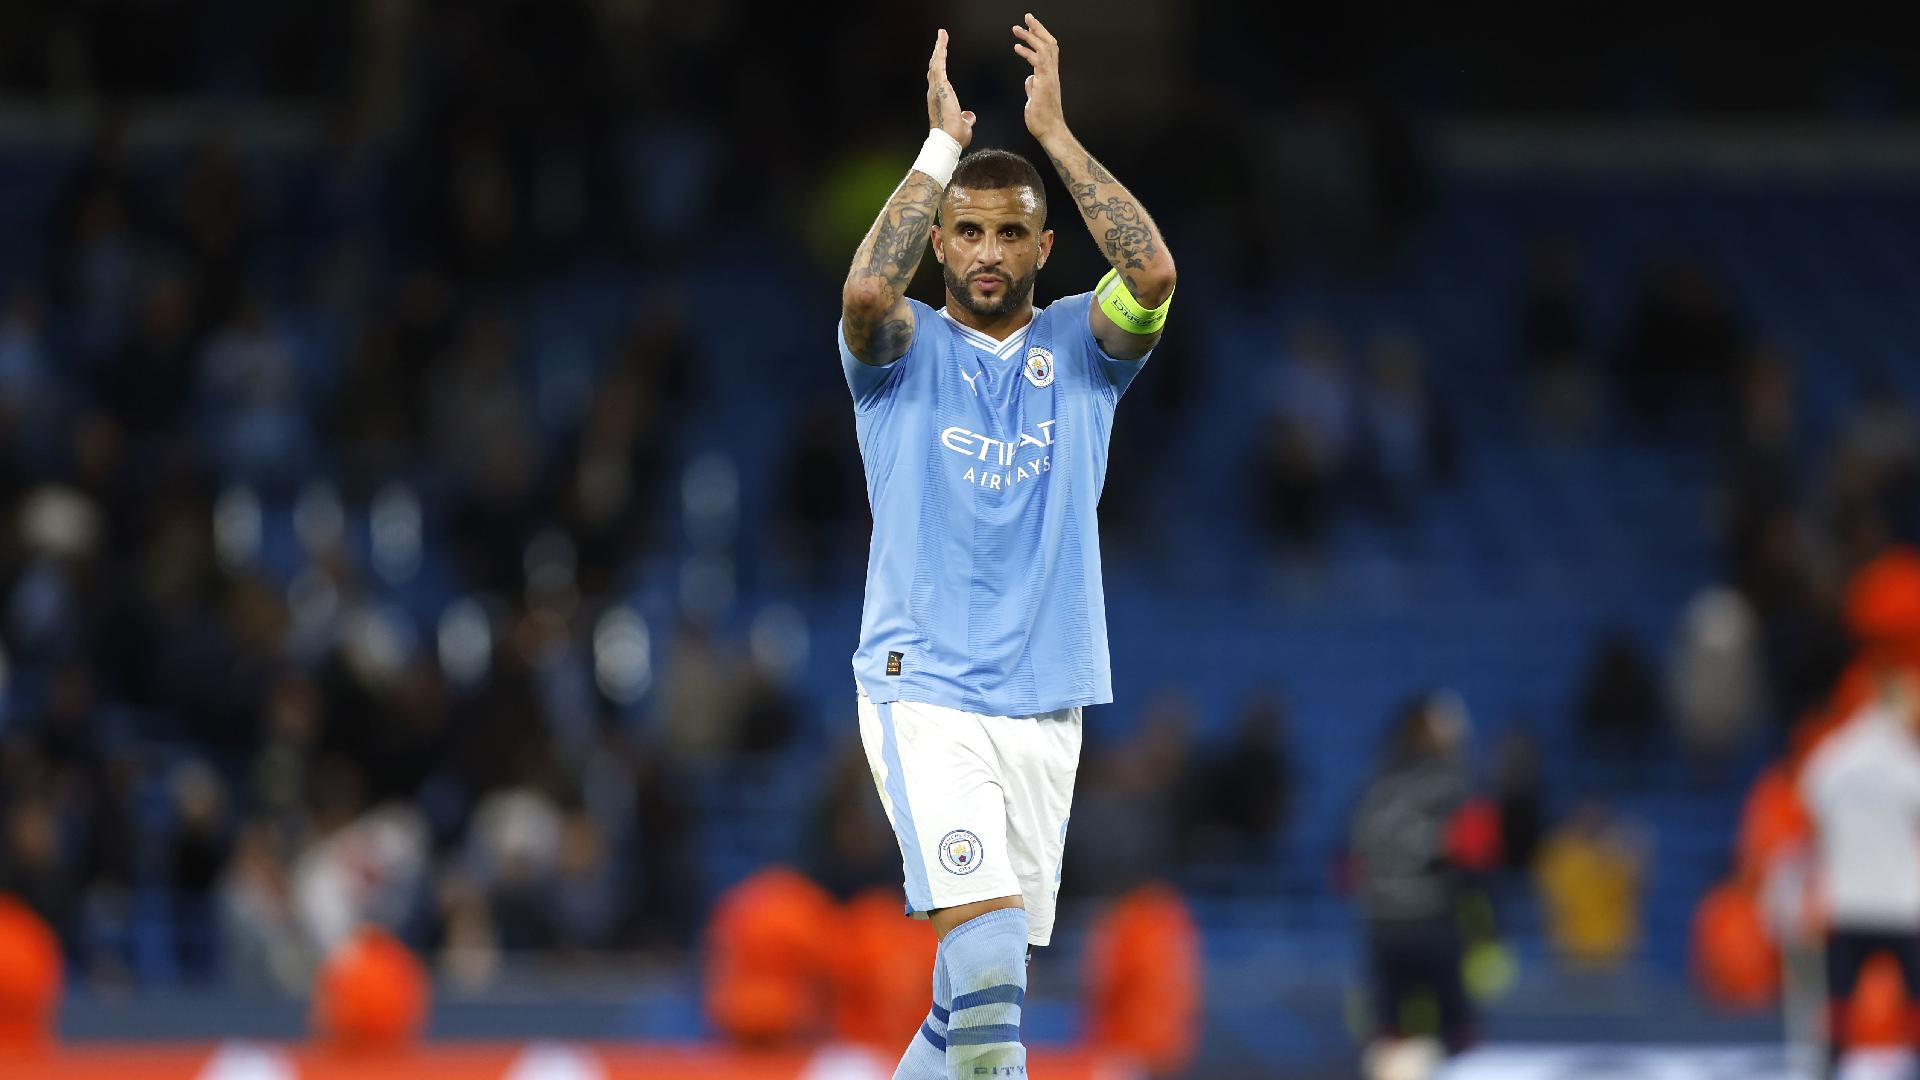 Kyle Walker to continue as Manchester City skipper ‘until the time is right’